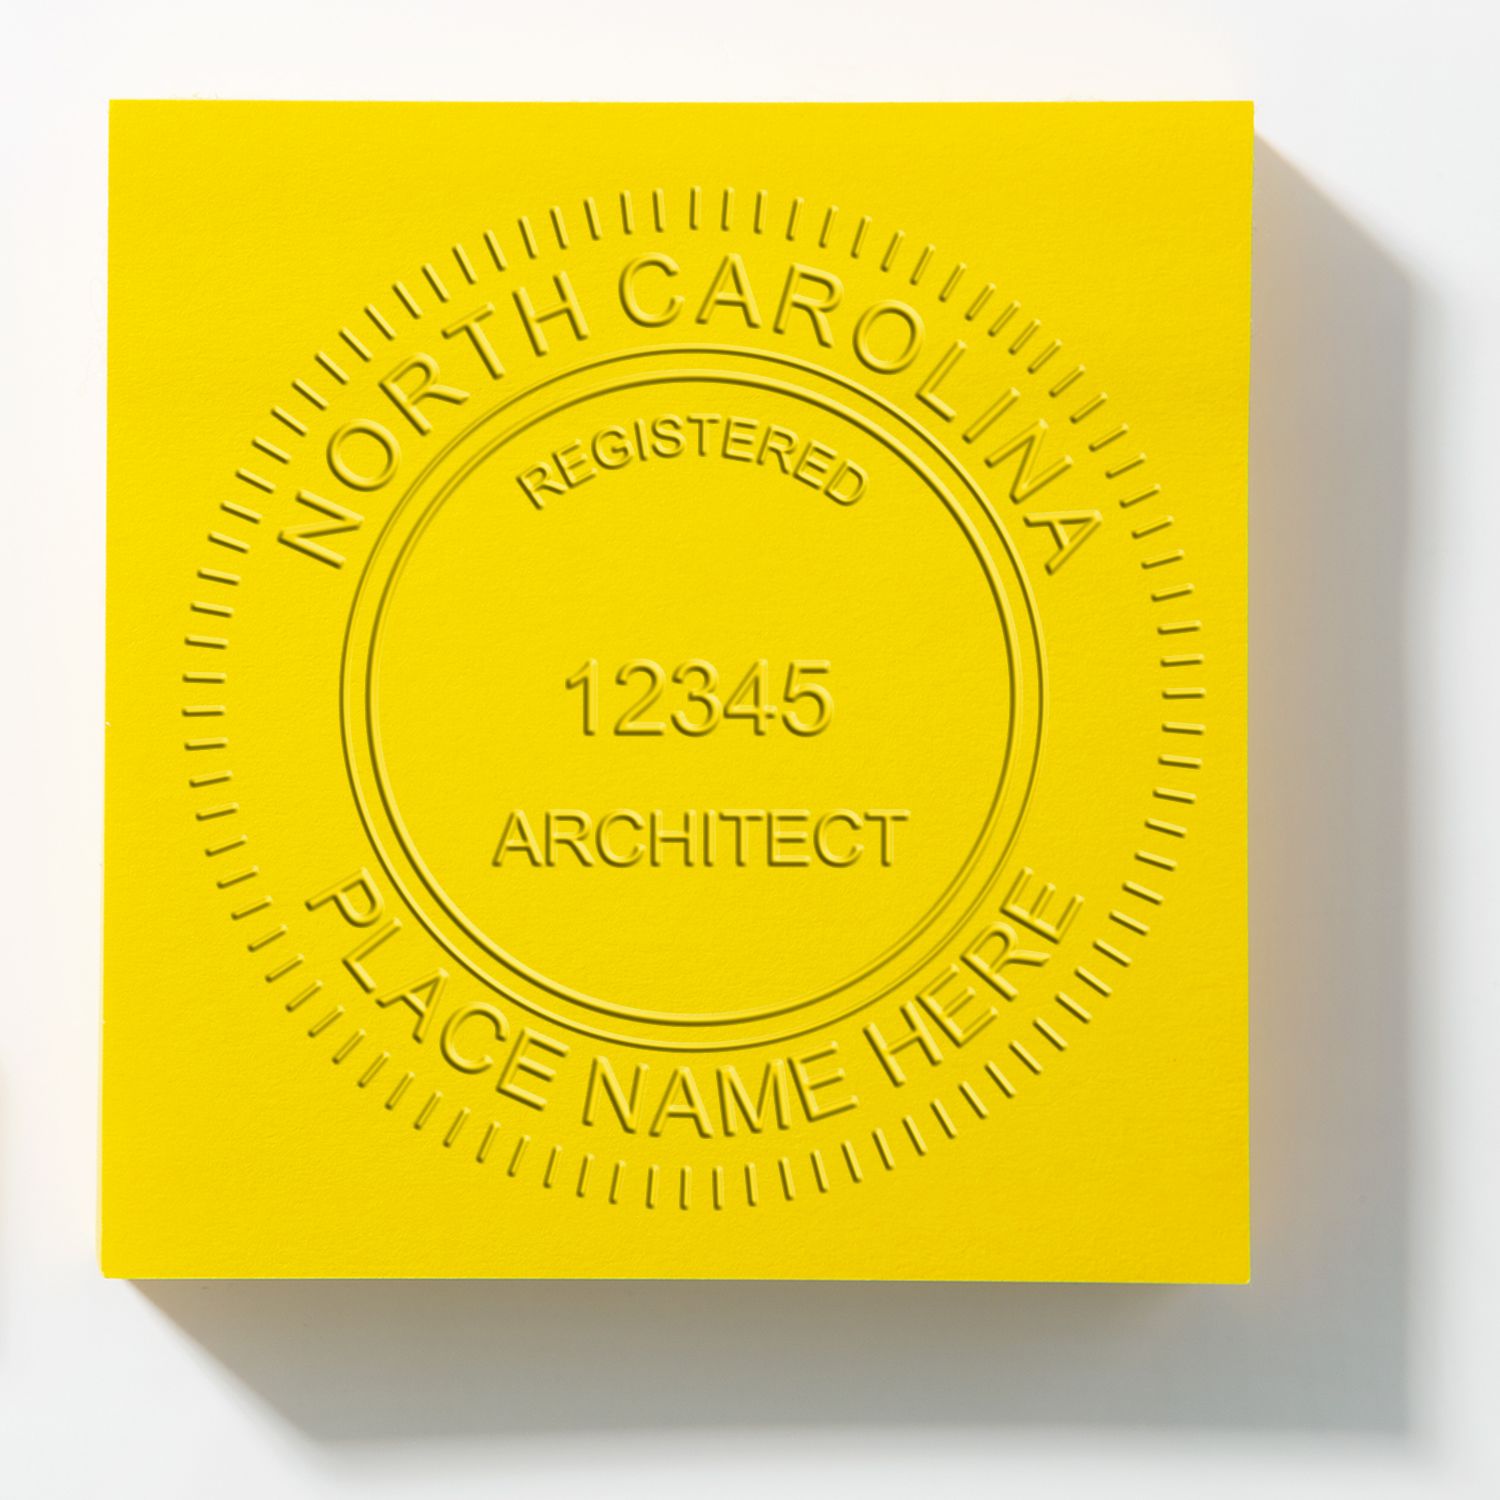 An in use photo of the Gift North Carolina Architect Seal showing a sample imprint on a cardstock